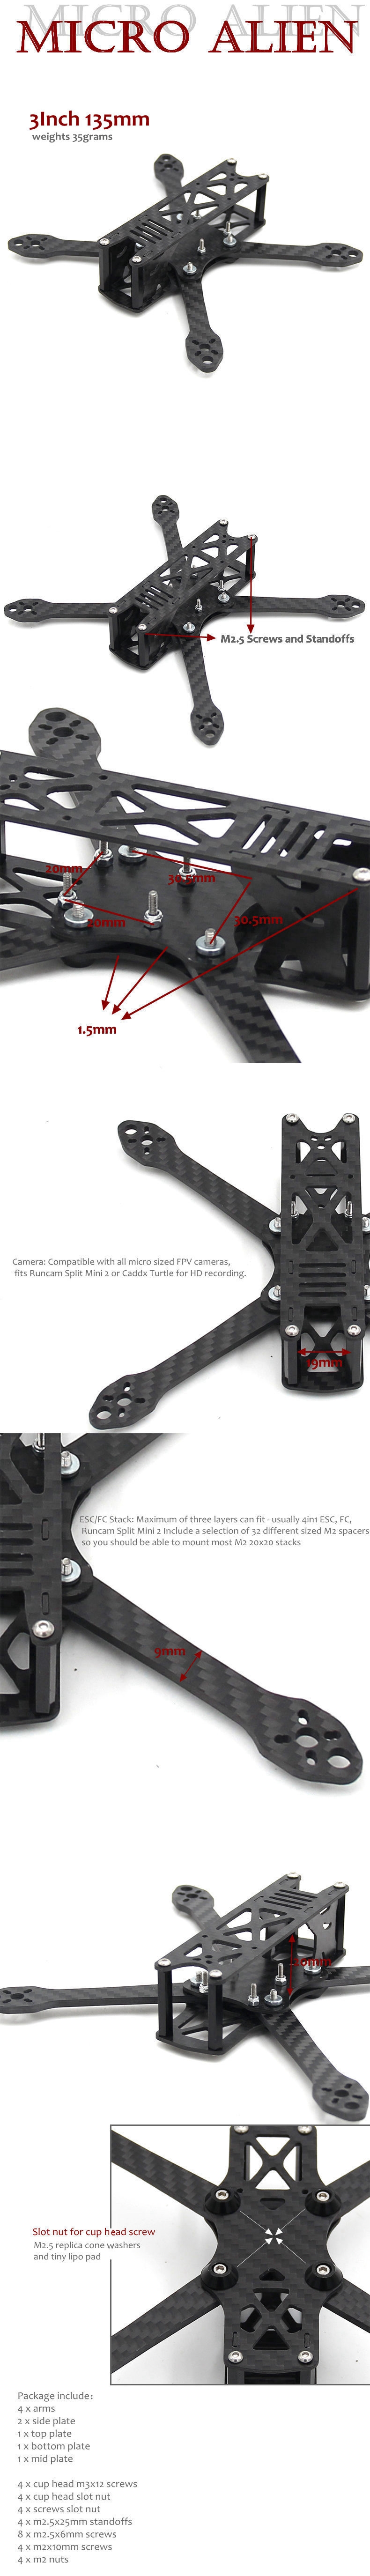 LEACO Micro Alien 3 Inch 135mm Carbon Fiber Frame Kit 2.5mm Arm for RC Drone FPV Racing